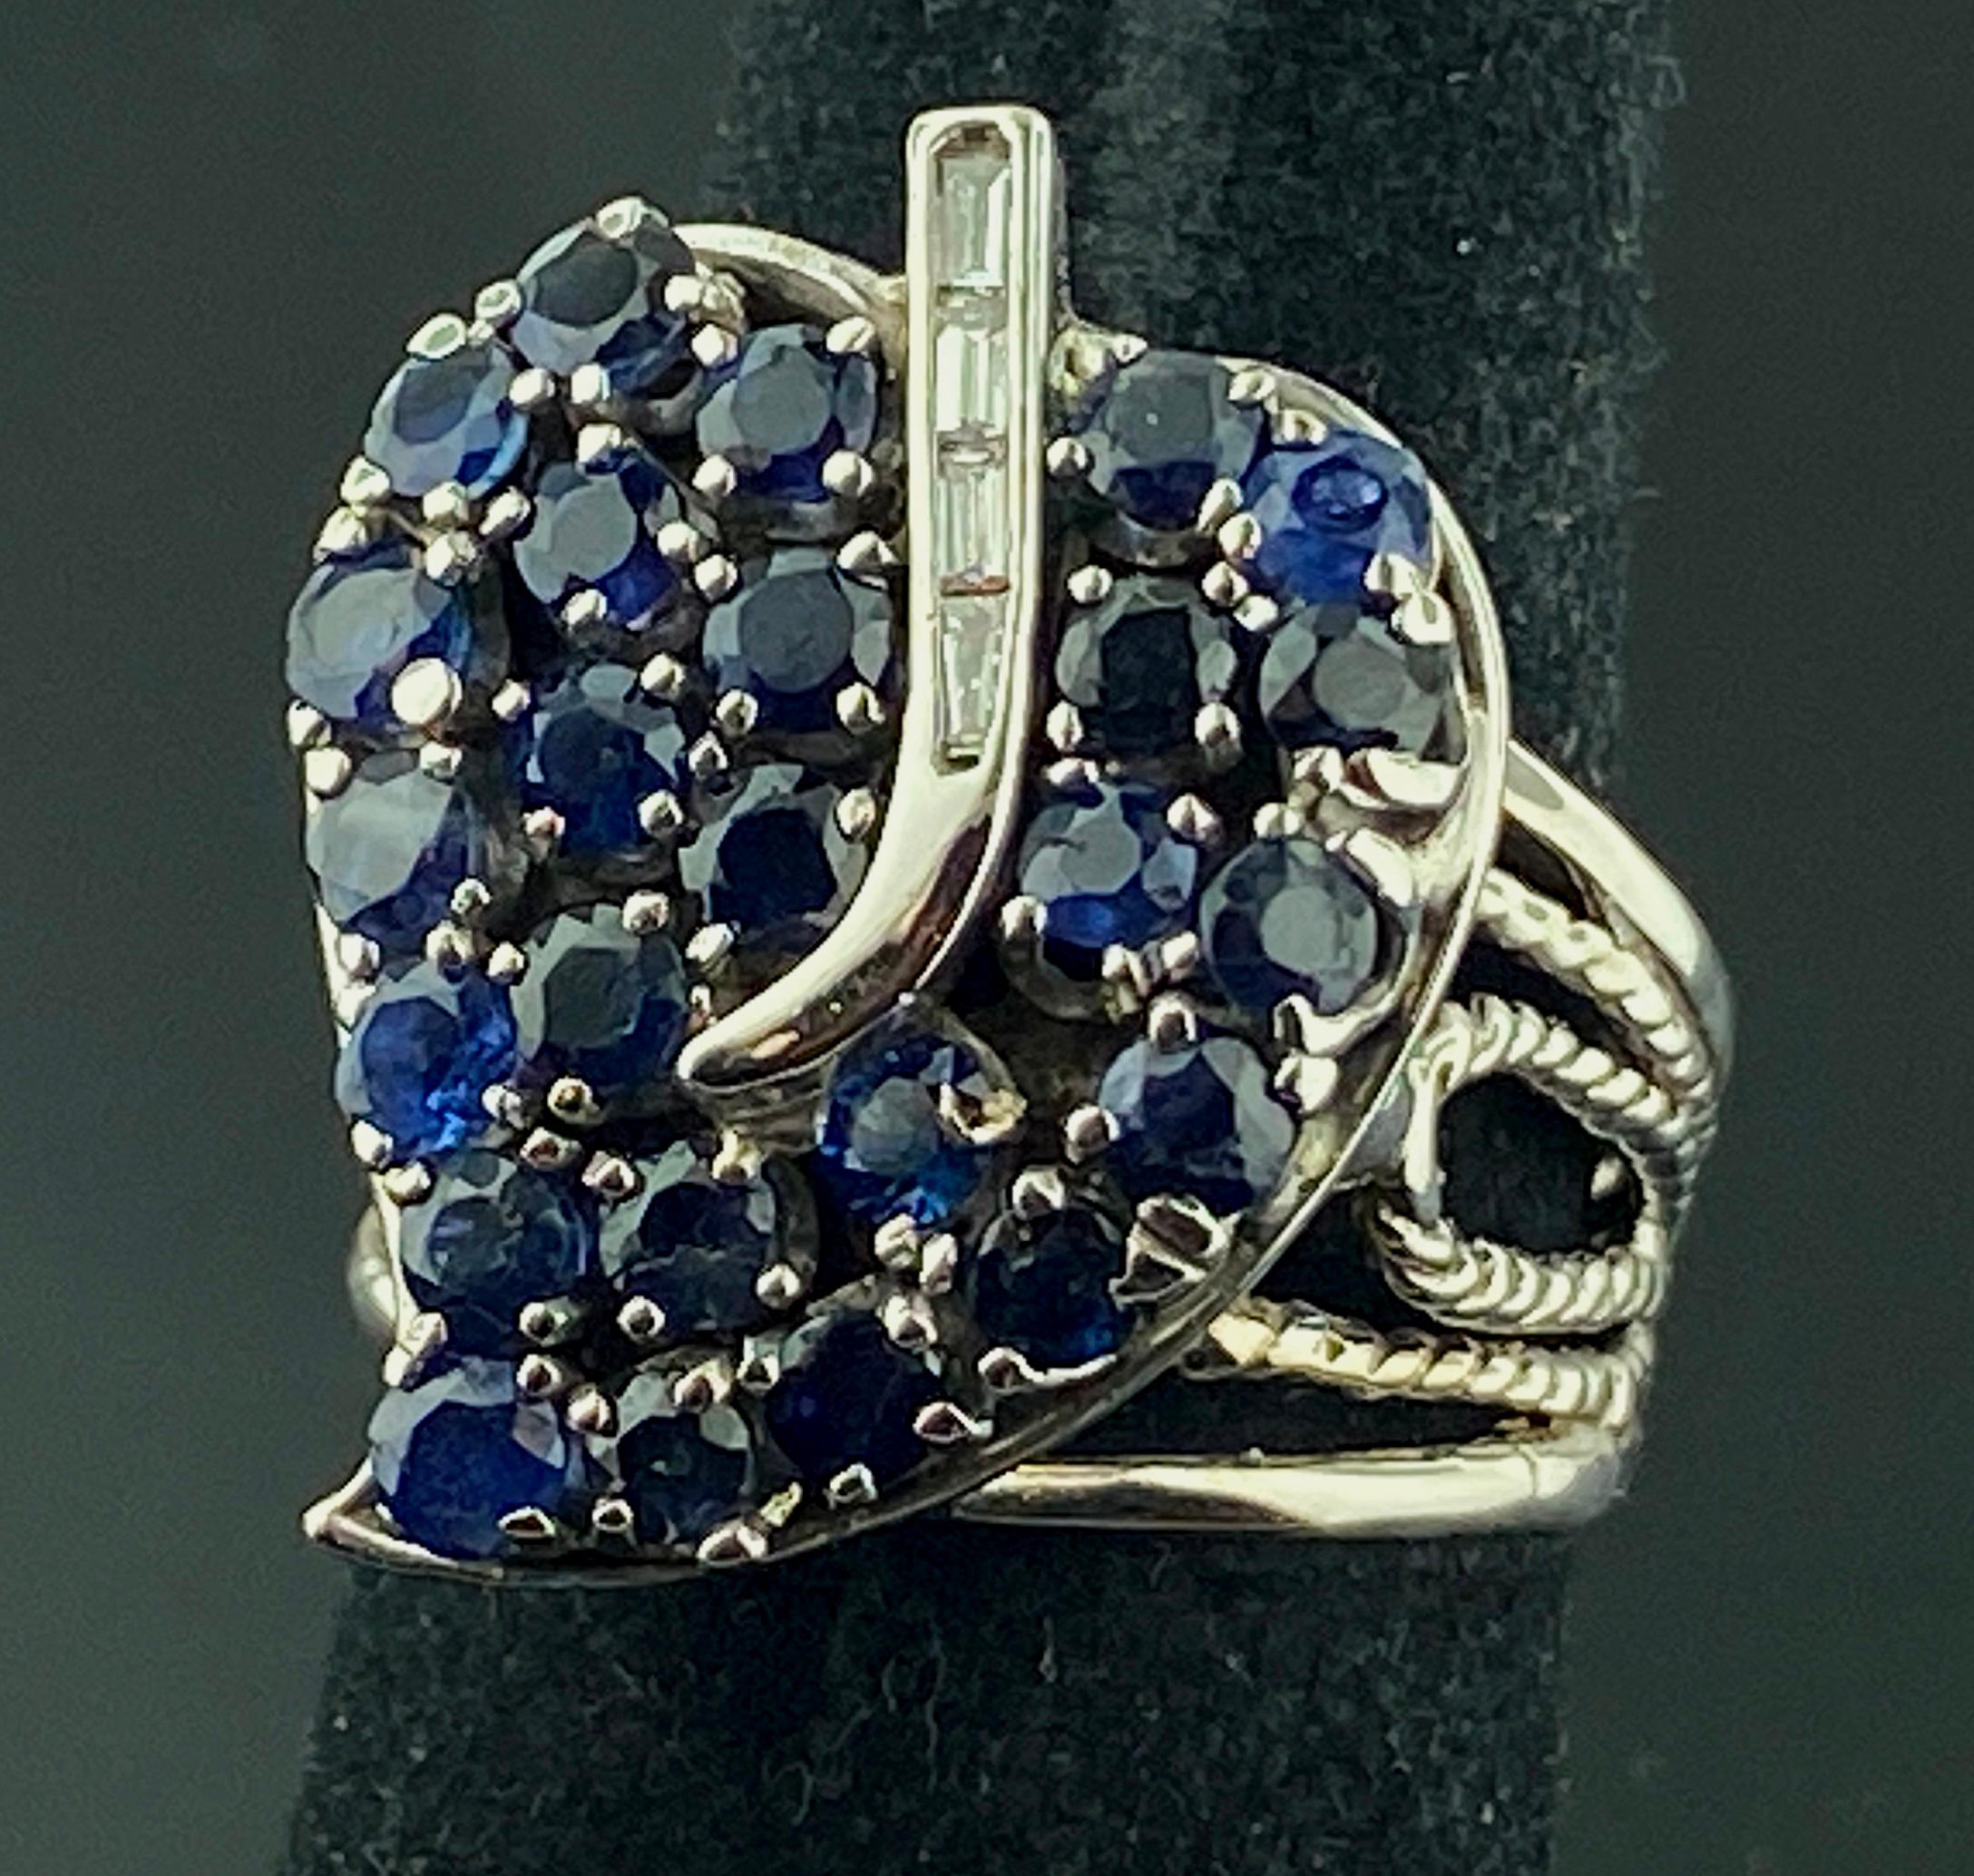 Set in 14 karat white gold are 25 round blue sapphires with a total weight of 2.25 carats, along with 4 baguette cut diamonds with a total diamond weight of 0.15.  Ring size is 6.5.